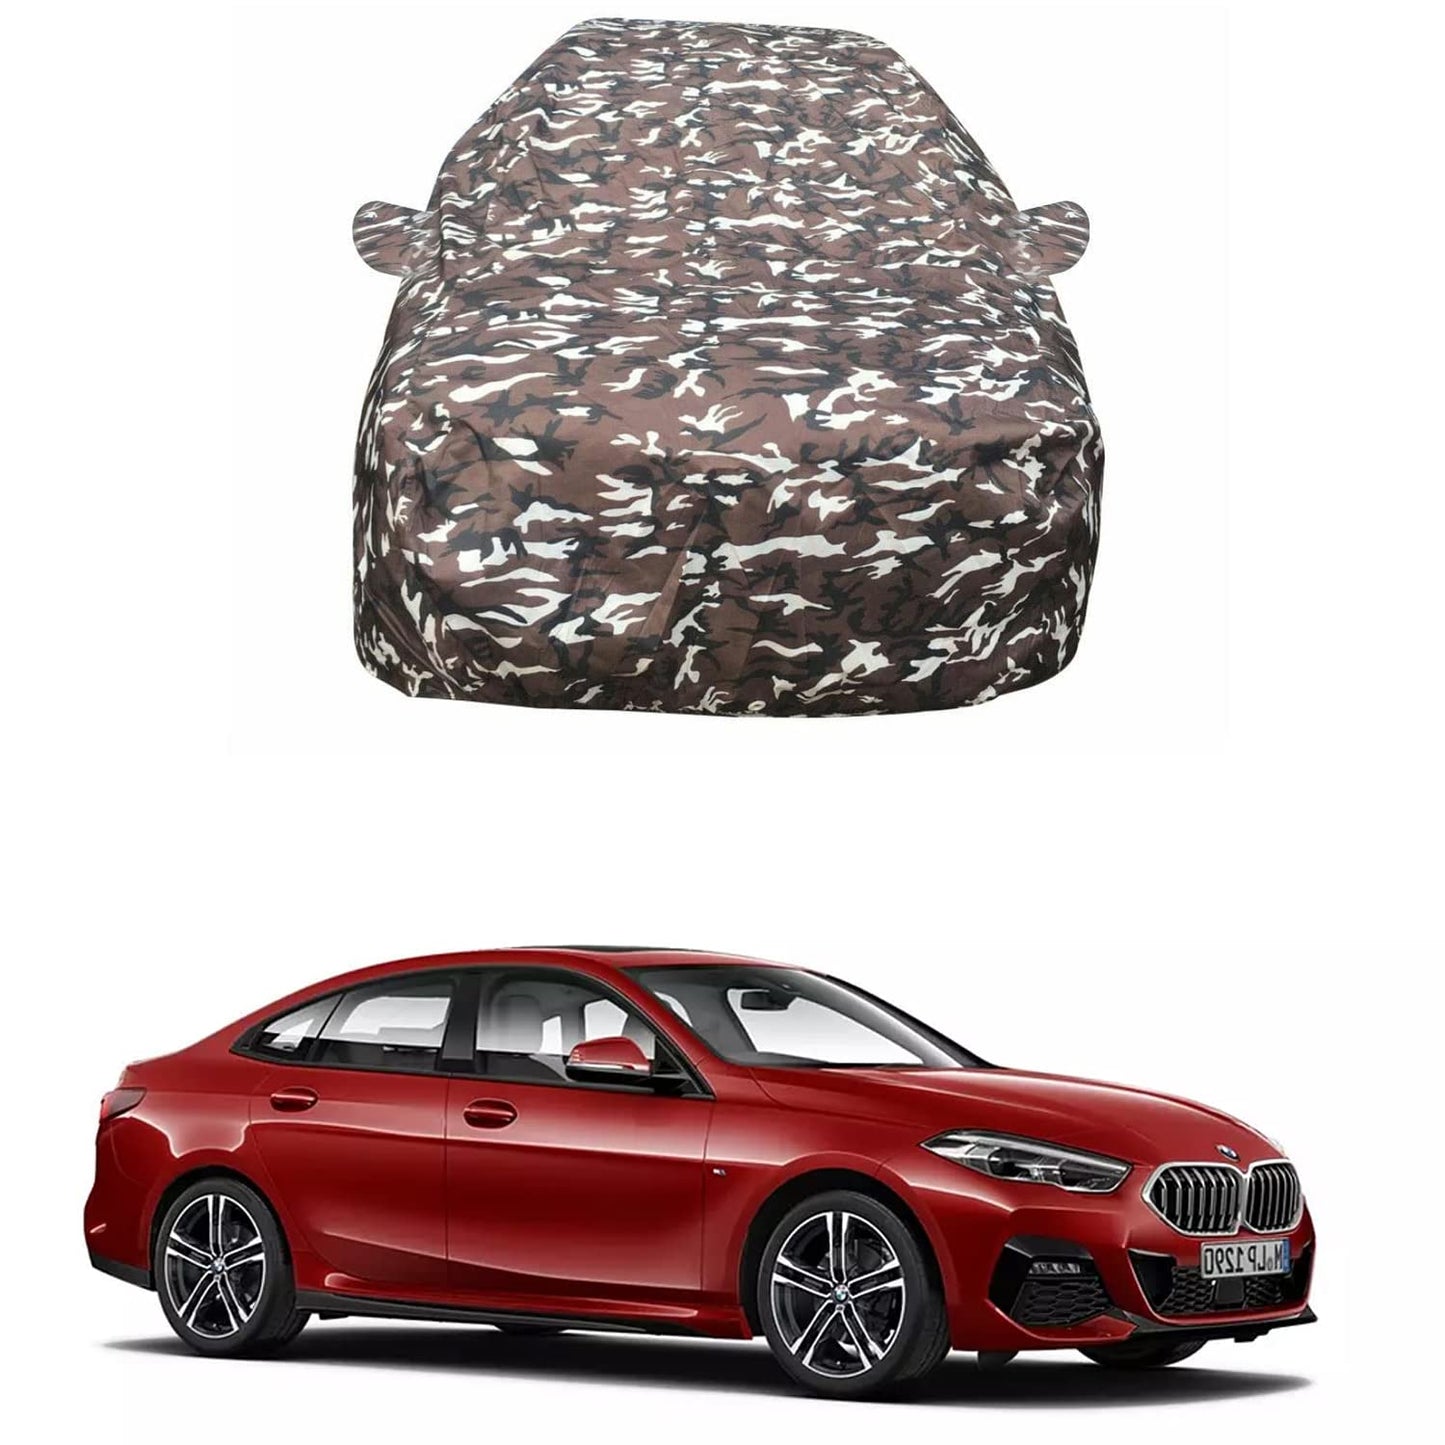 Oshotto Ranger Design Made of 100% Waterproof Fabric Multicolor Car Body Cover with Mirror Pockets For BMW 2 Series